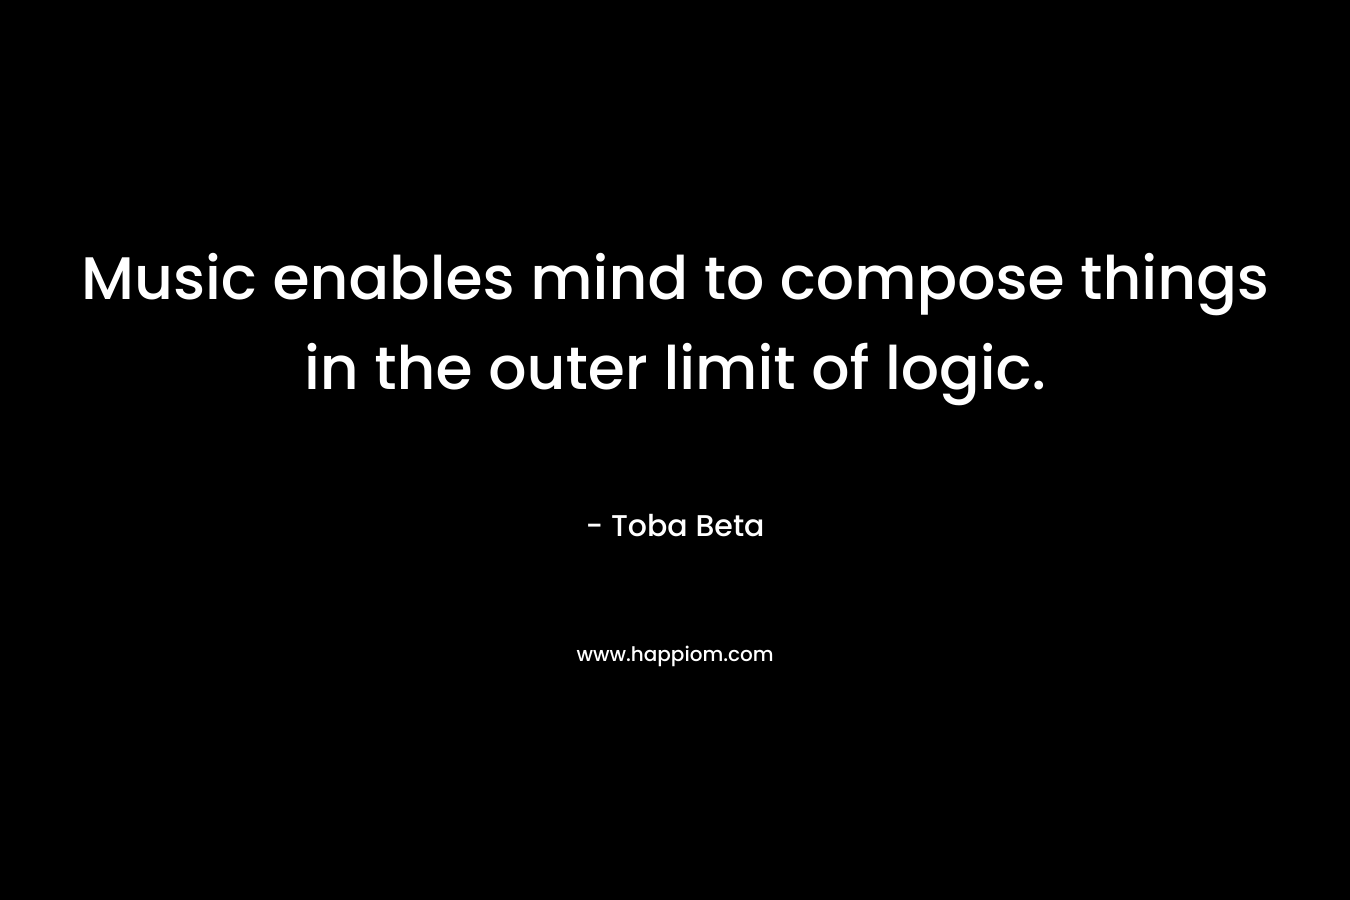 Music enables mind to compose things in the outer limit of logic. – Toba Beta